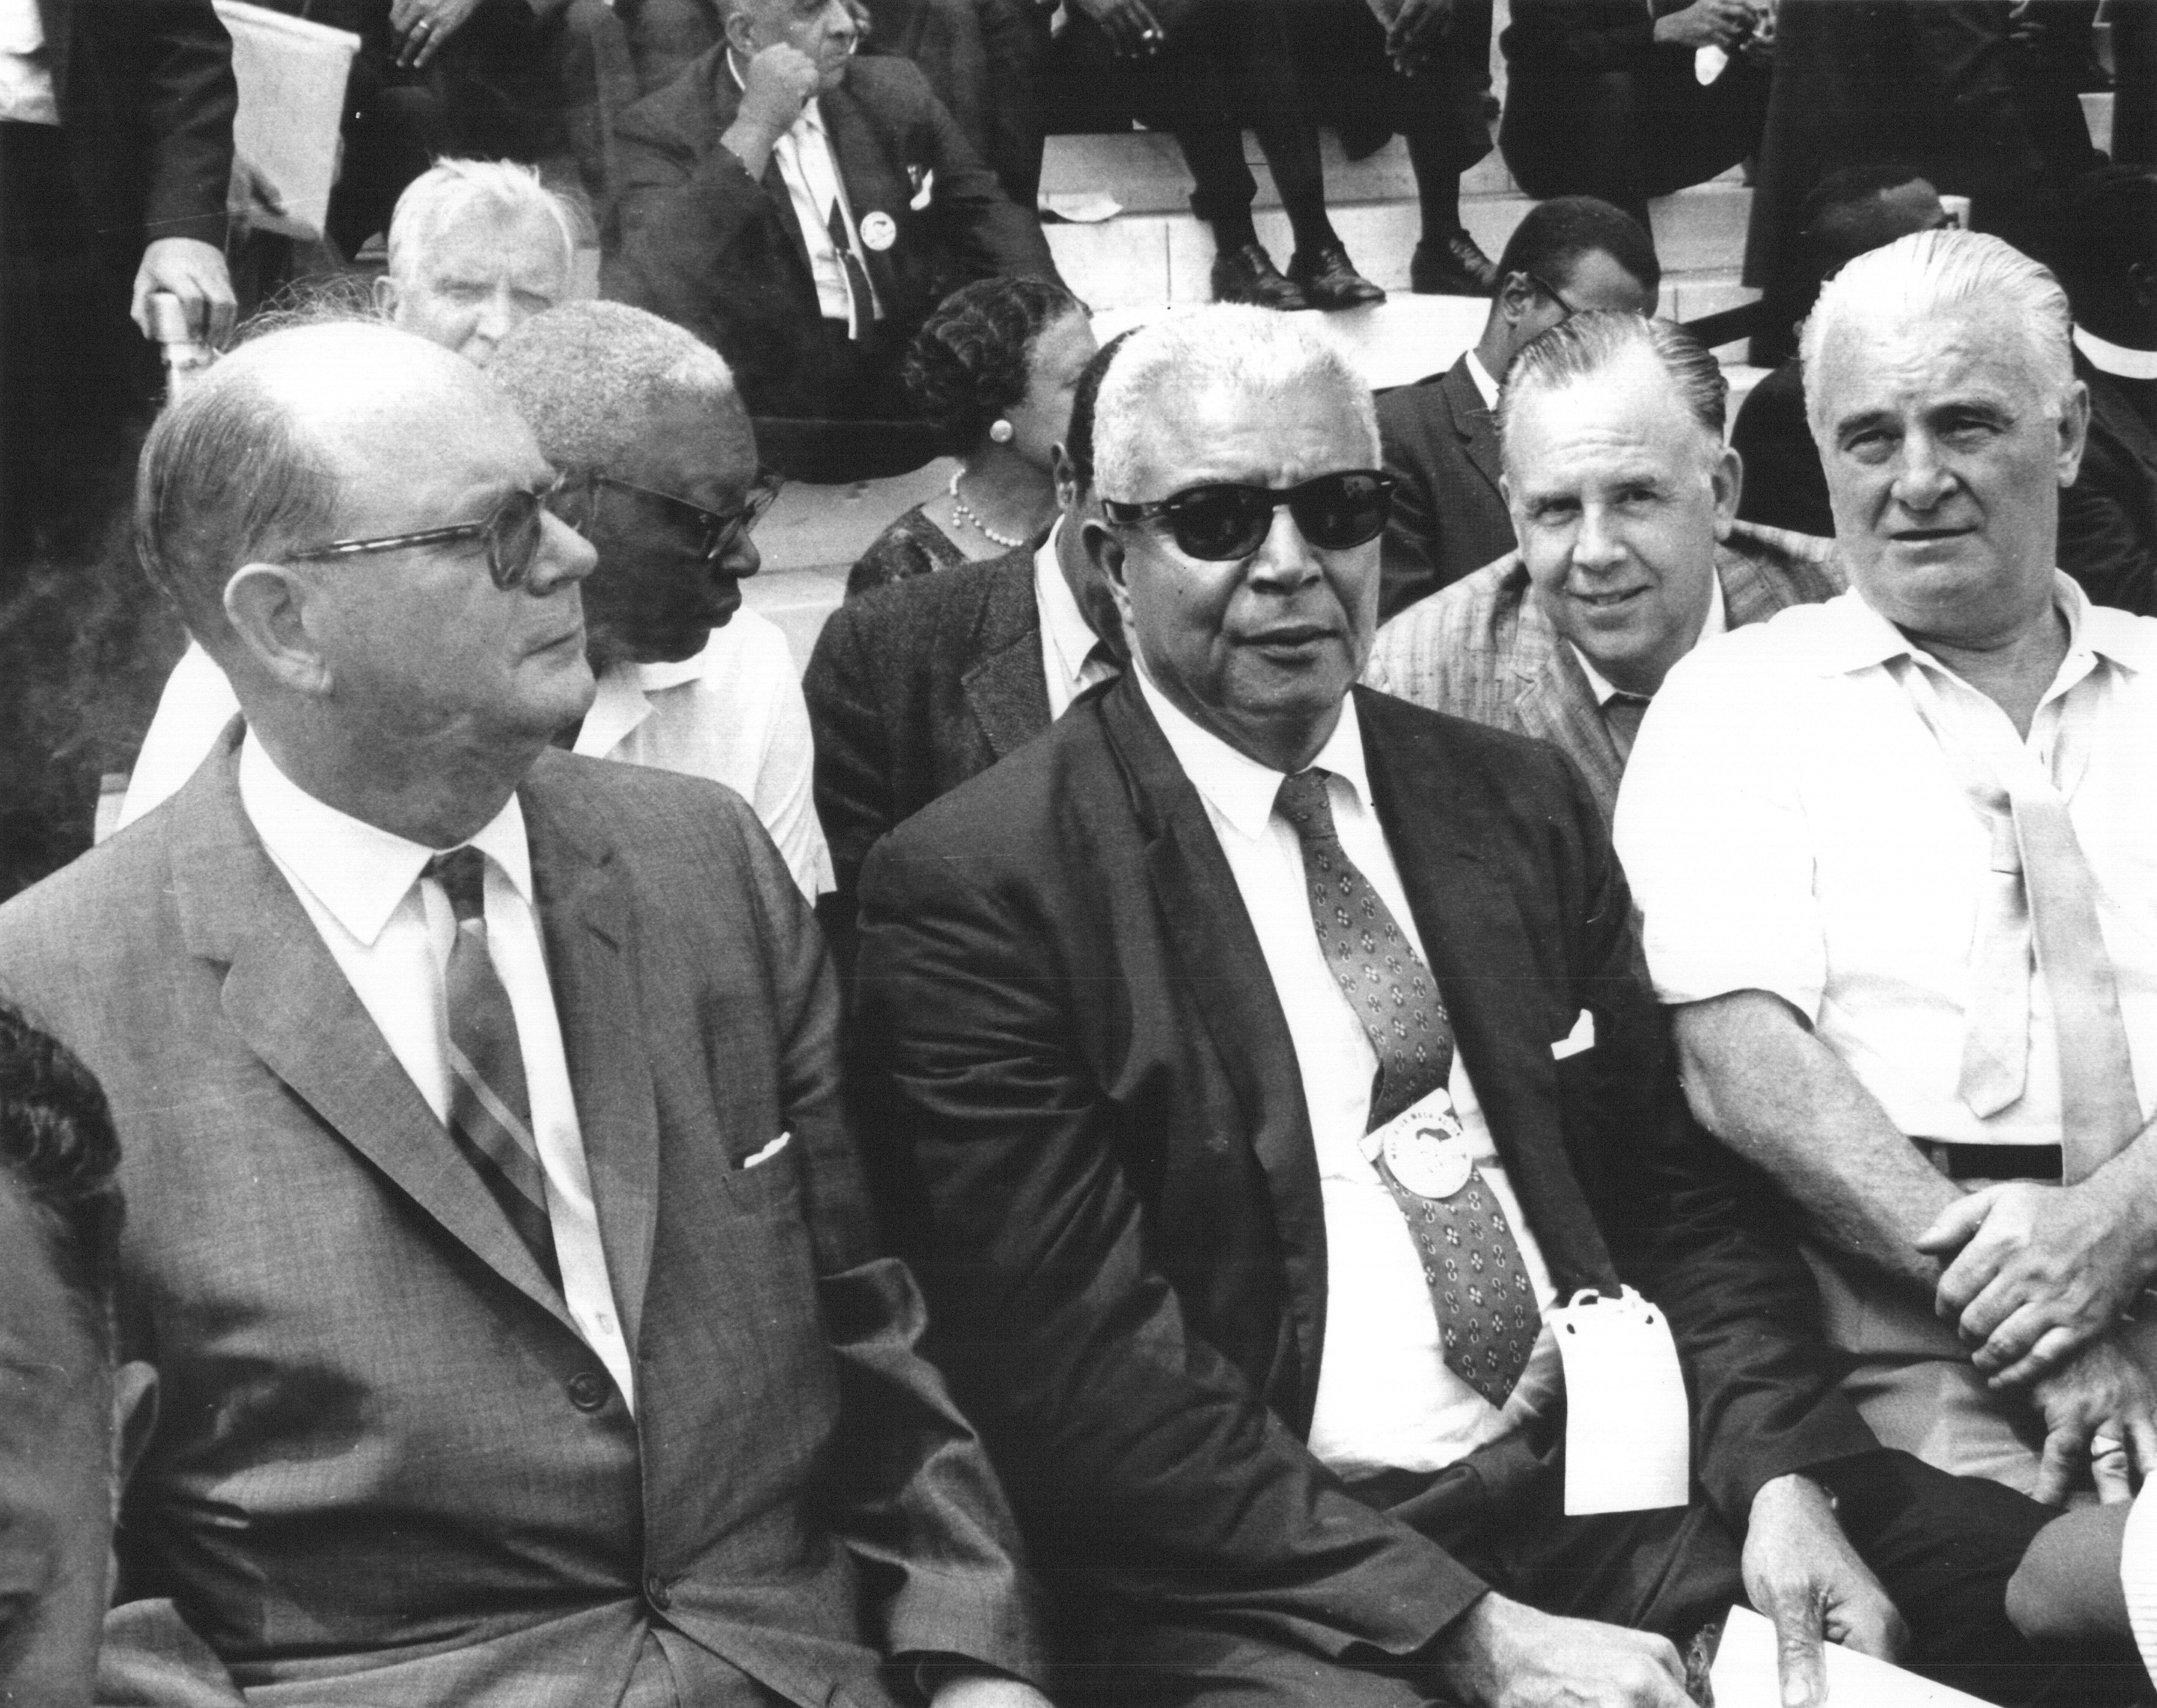 At the March on Washington for Jobs and Freedom on August 28th, 1963, left to right: David Sullivan, International President of the Building Service Employees Union (now the SEIU); William Bowe; and Harry Van Arsdale Jr.